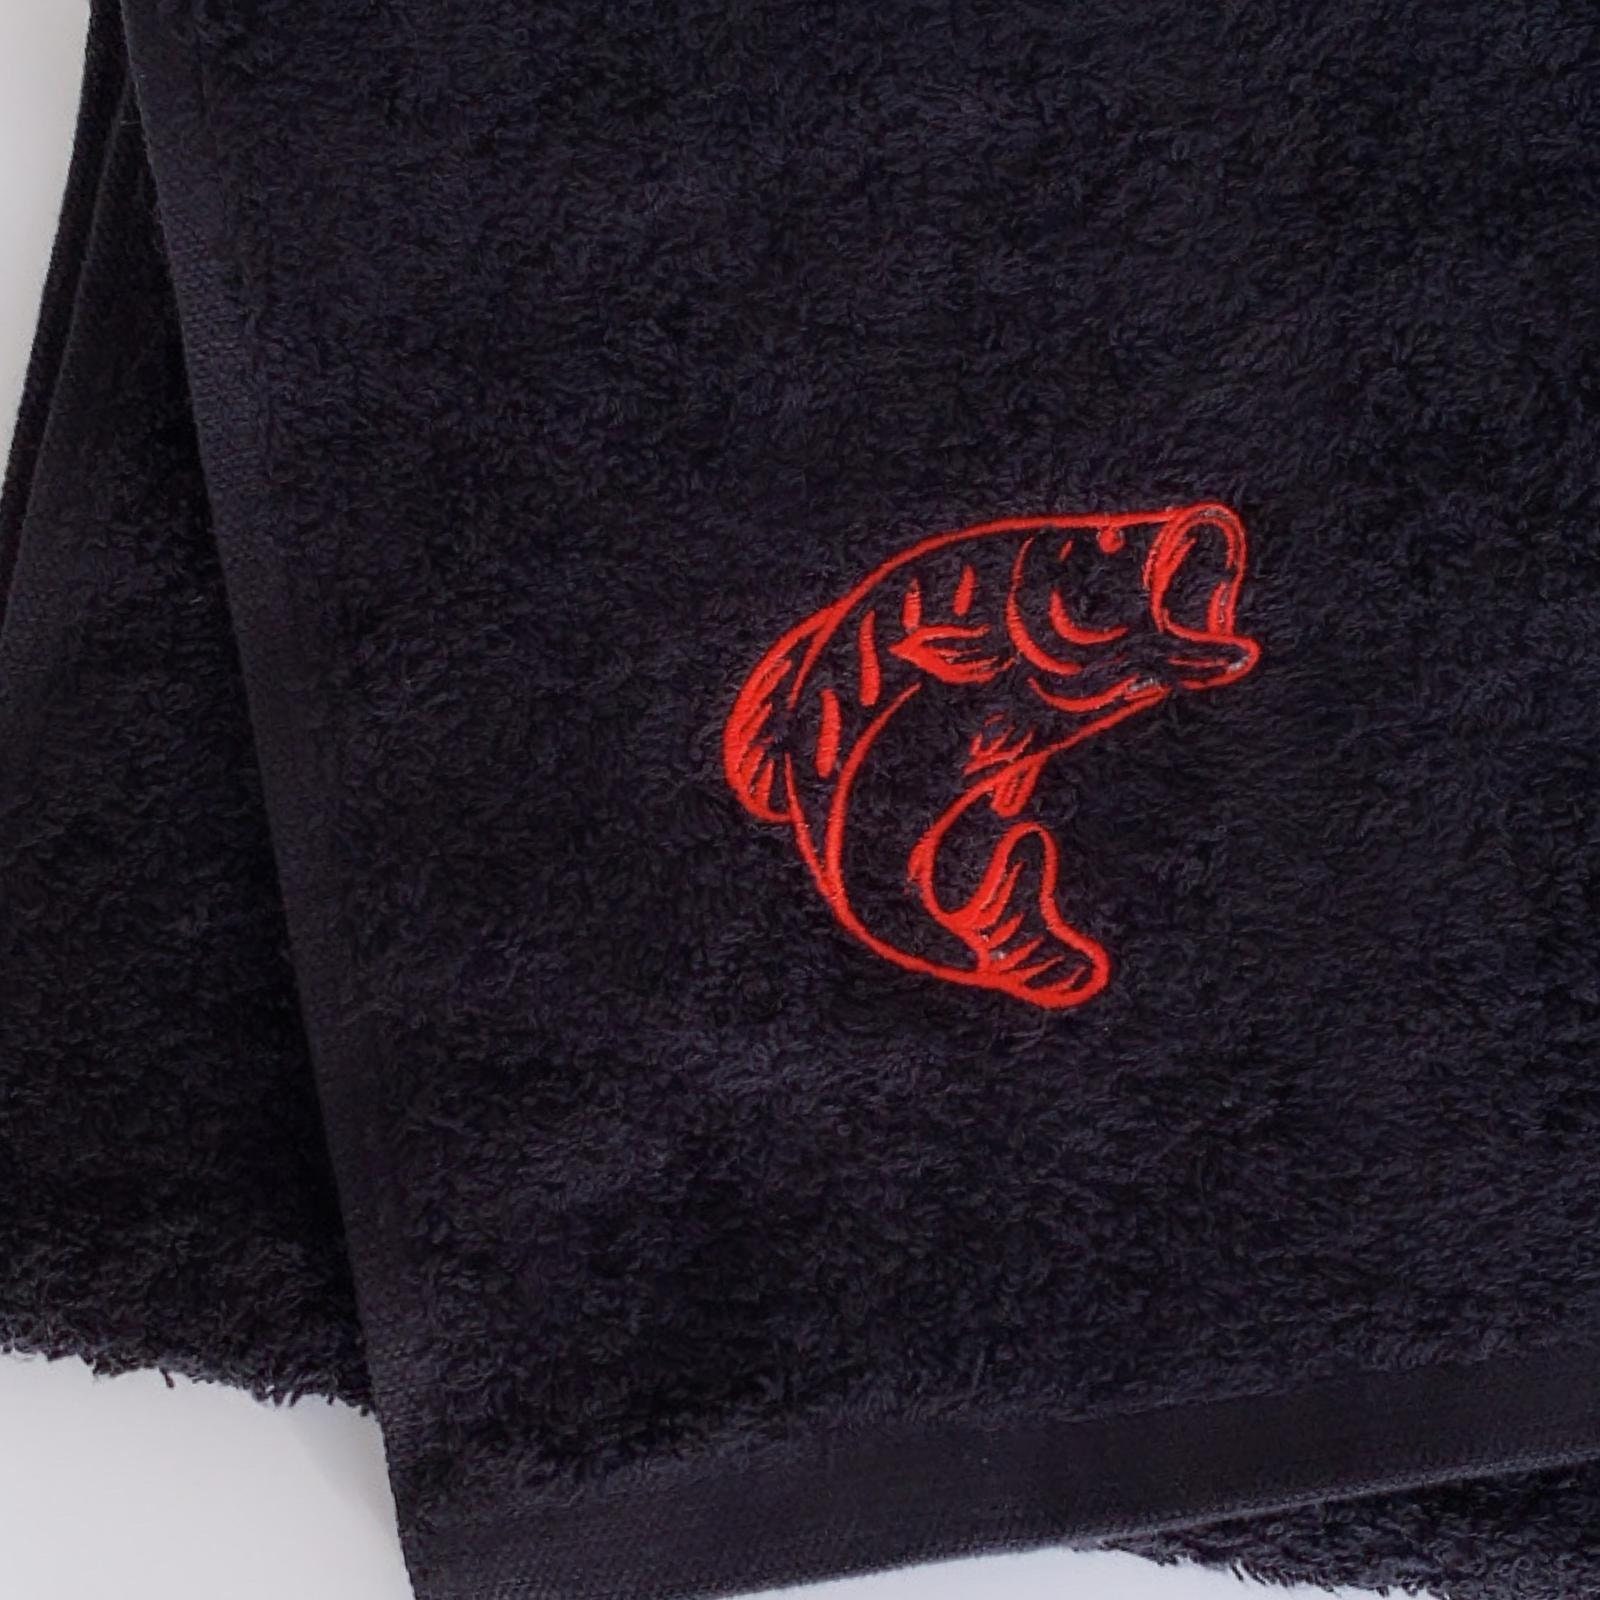 Fishing Towel 100% Soft Cotton Towelling Handy Size Available in